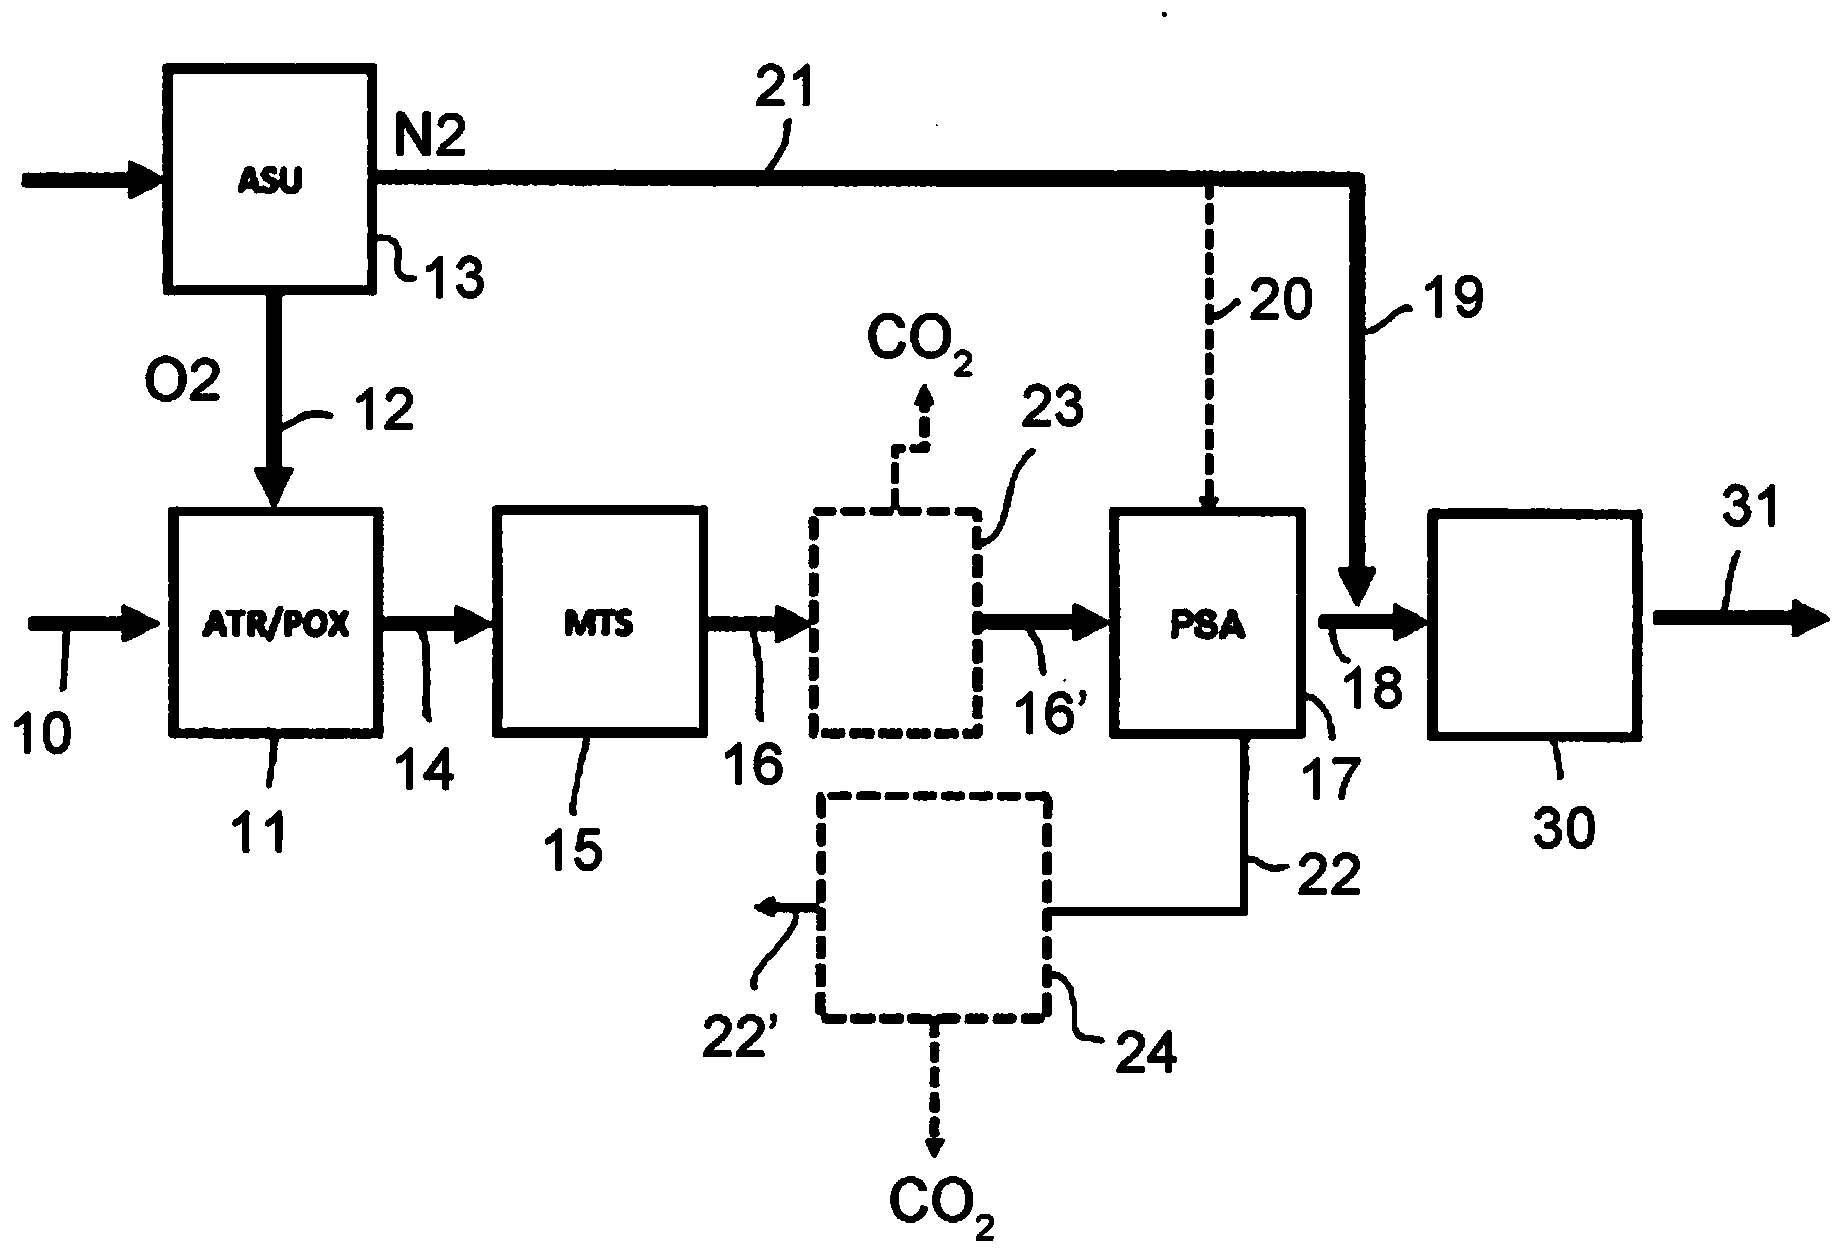 A process for producing ammonia synthesis gas and a related front-end of an ammonia plant